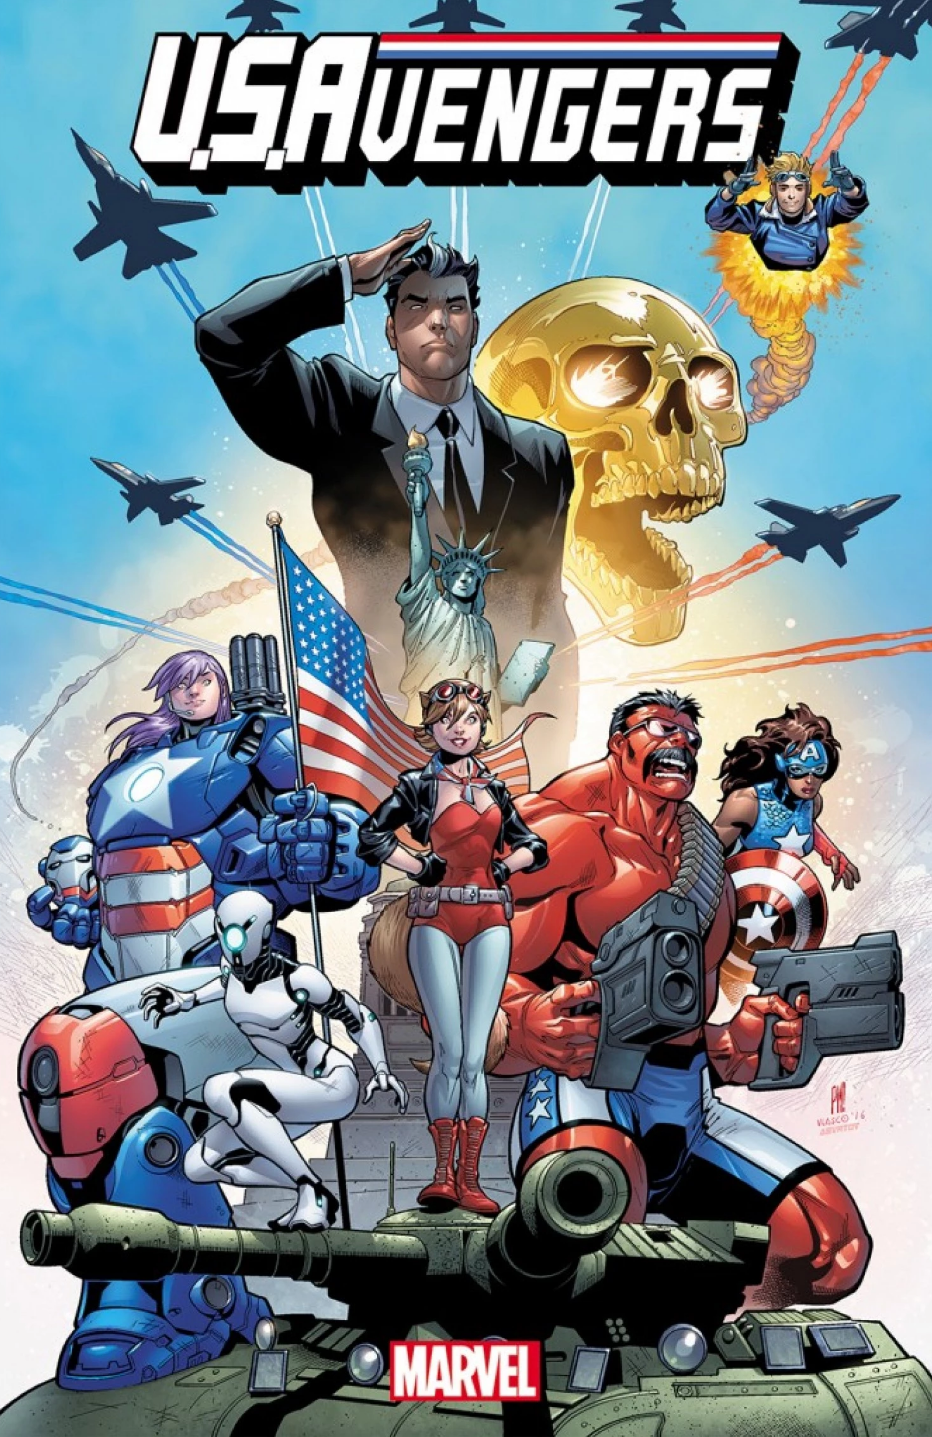 Marvel’s Next Avengers Team Is Gonna Be As Patriotic As Hell